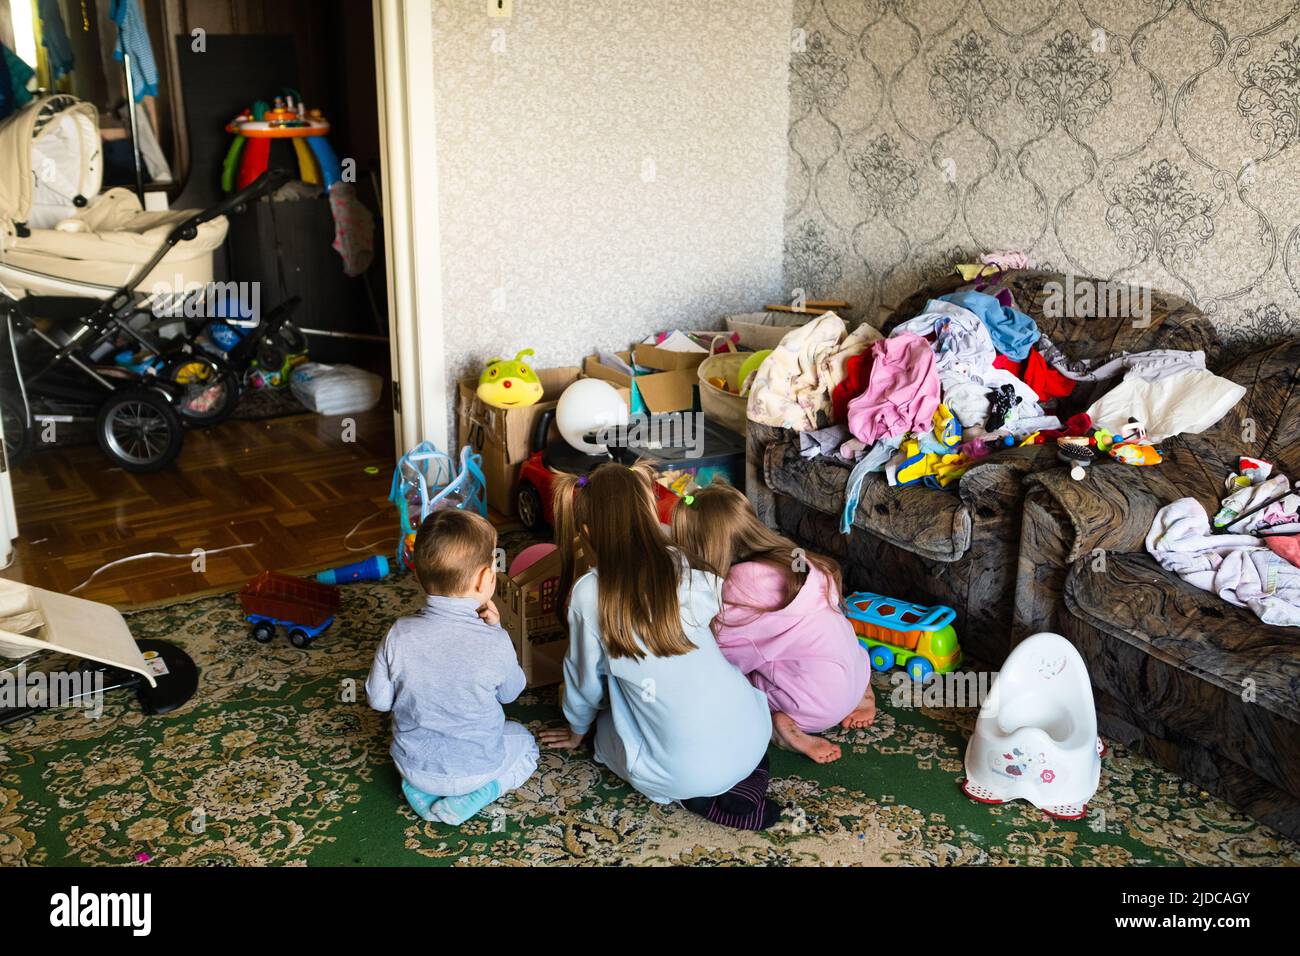 Three unrecognizable children are playing in a dirty cluttered room. Stock Photo